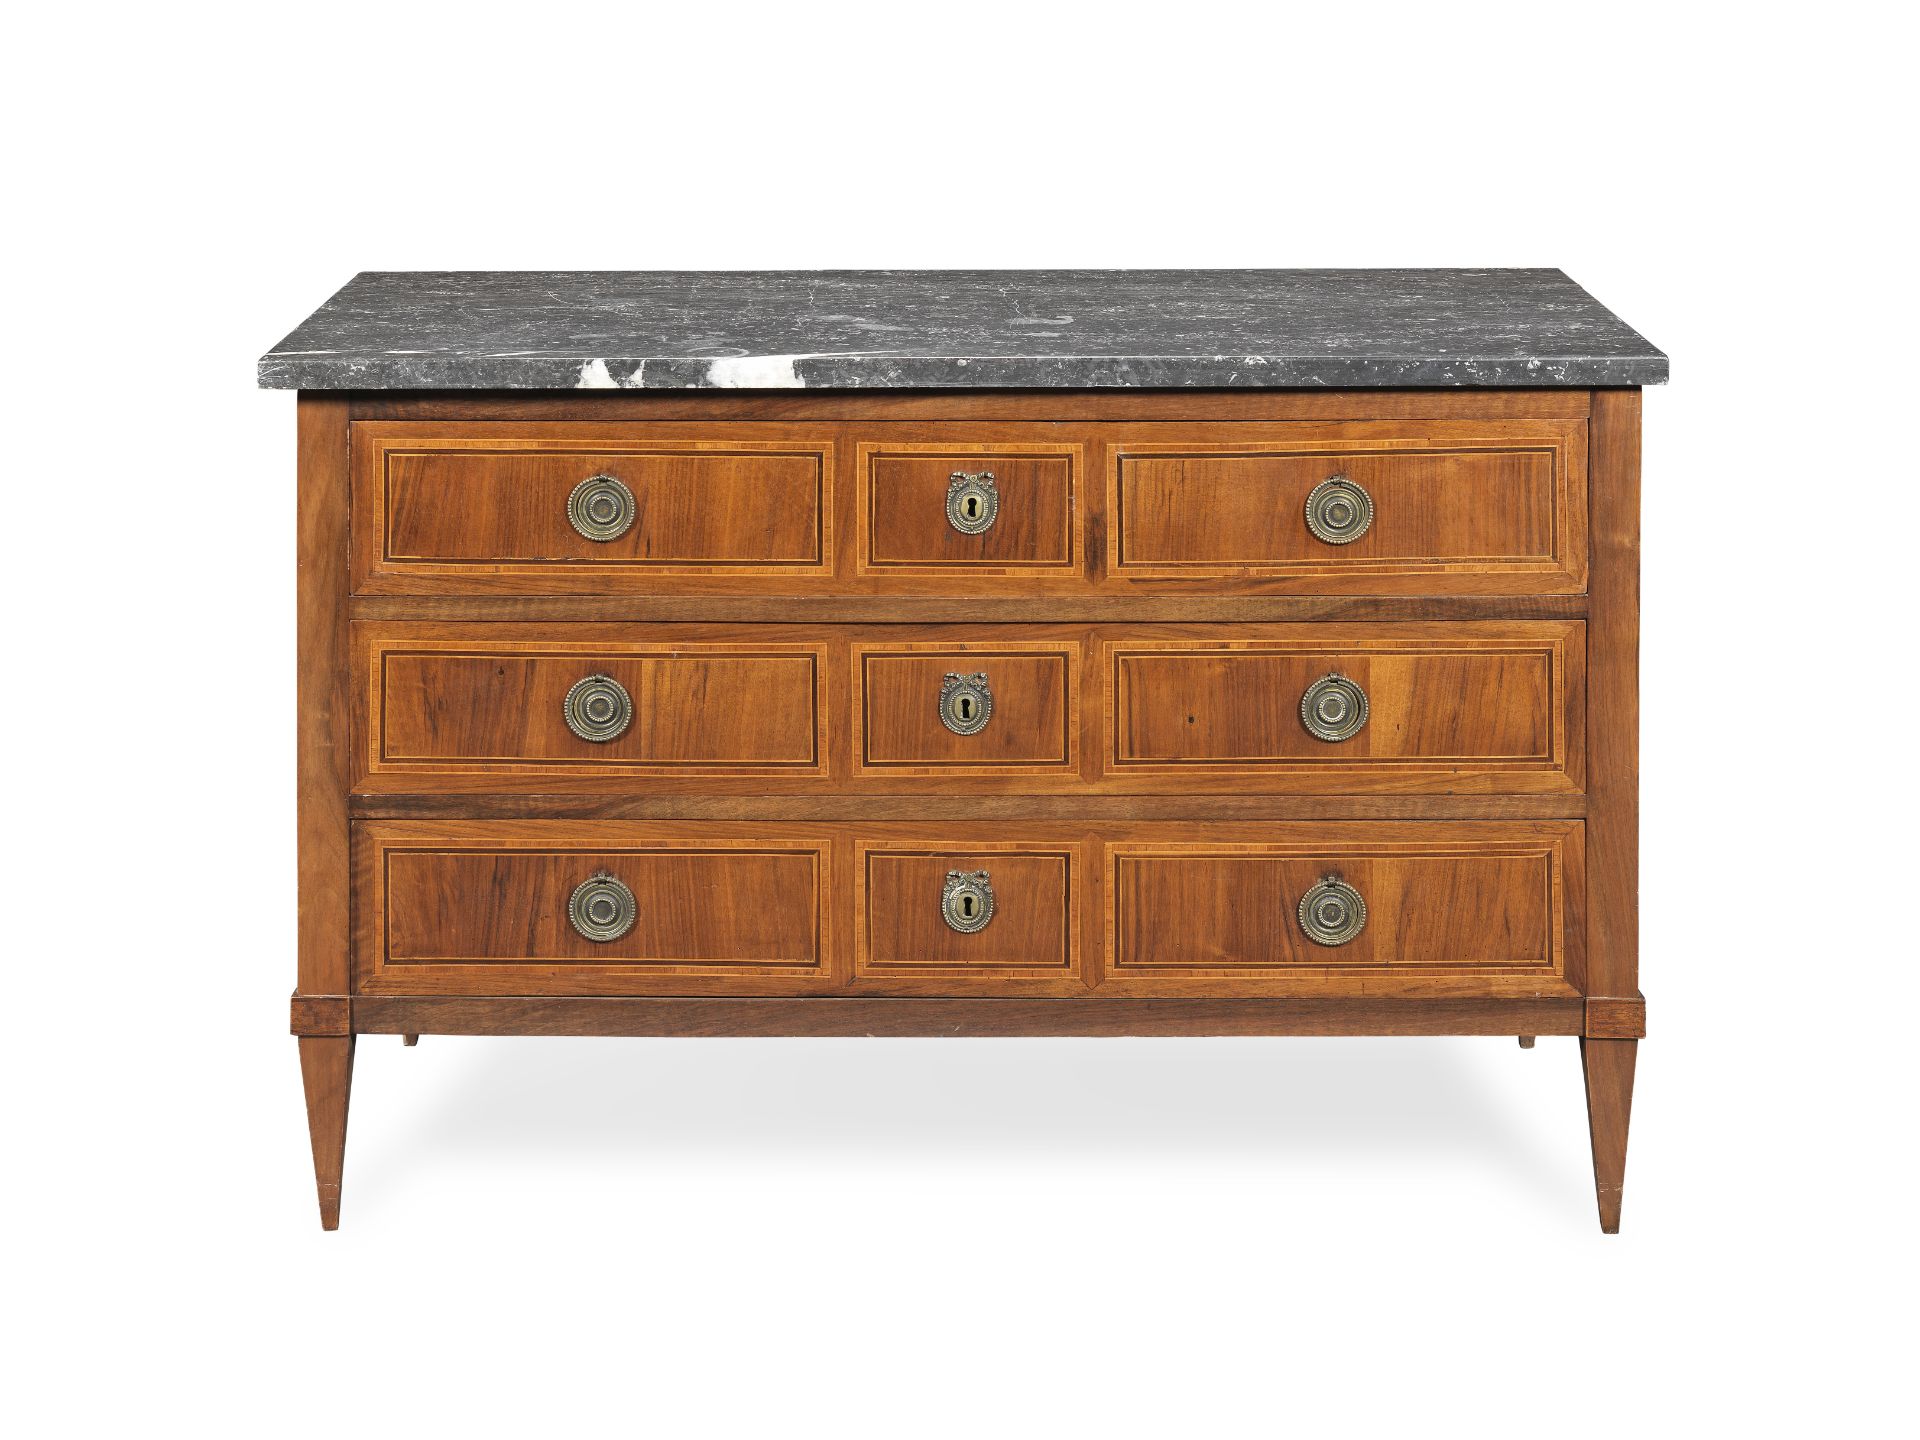 A French or North Italian walnut, purplewood banded and tulipwood crossbanded commode probably co...